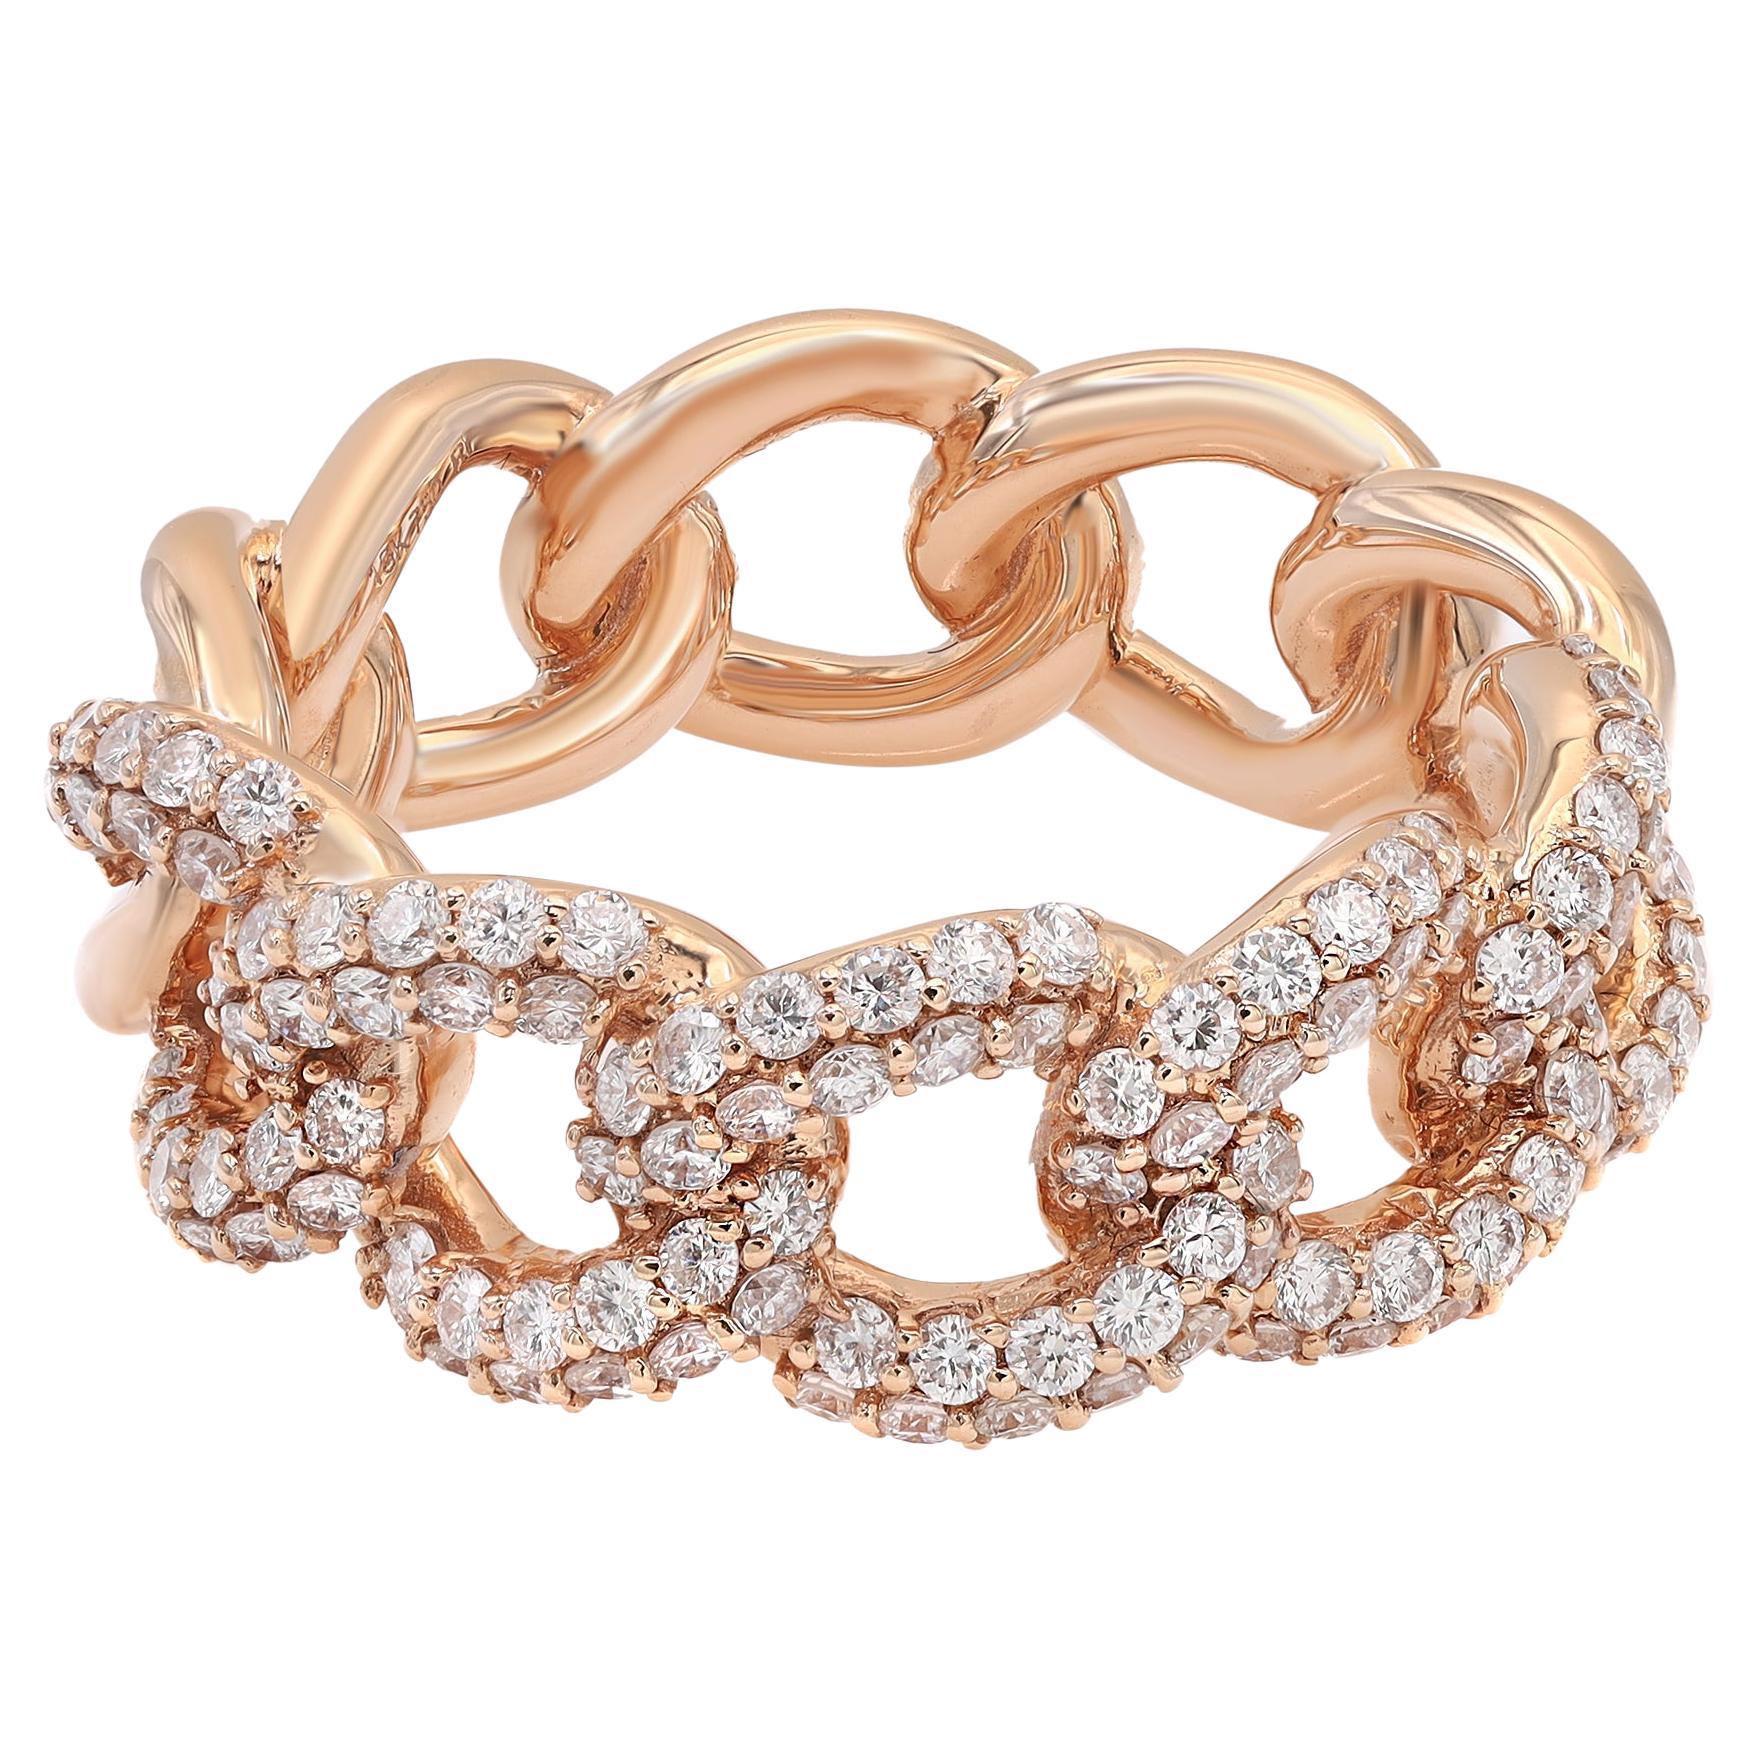 Pave Set Round Cut Diamond Chain Link Ring Band 18K Rose Gold 1.00Cttw Size 5.75